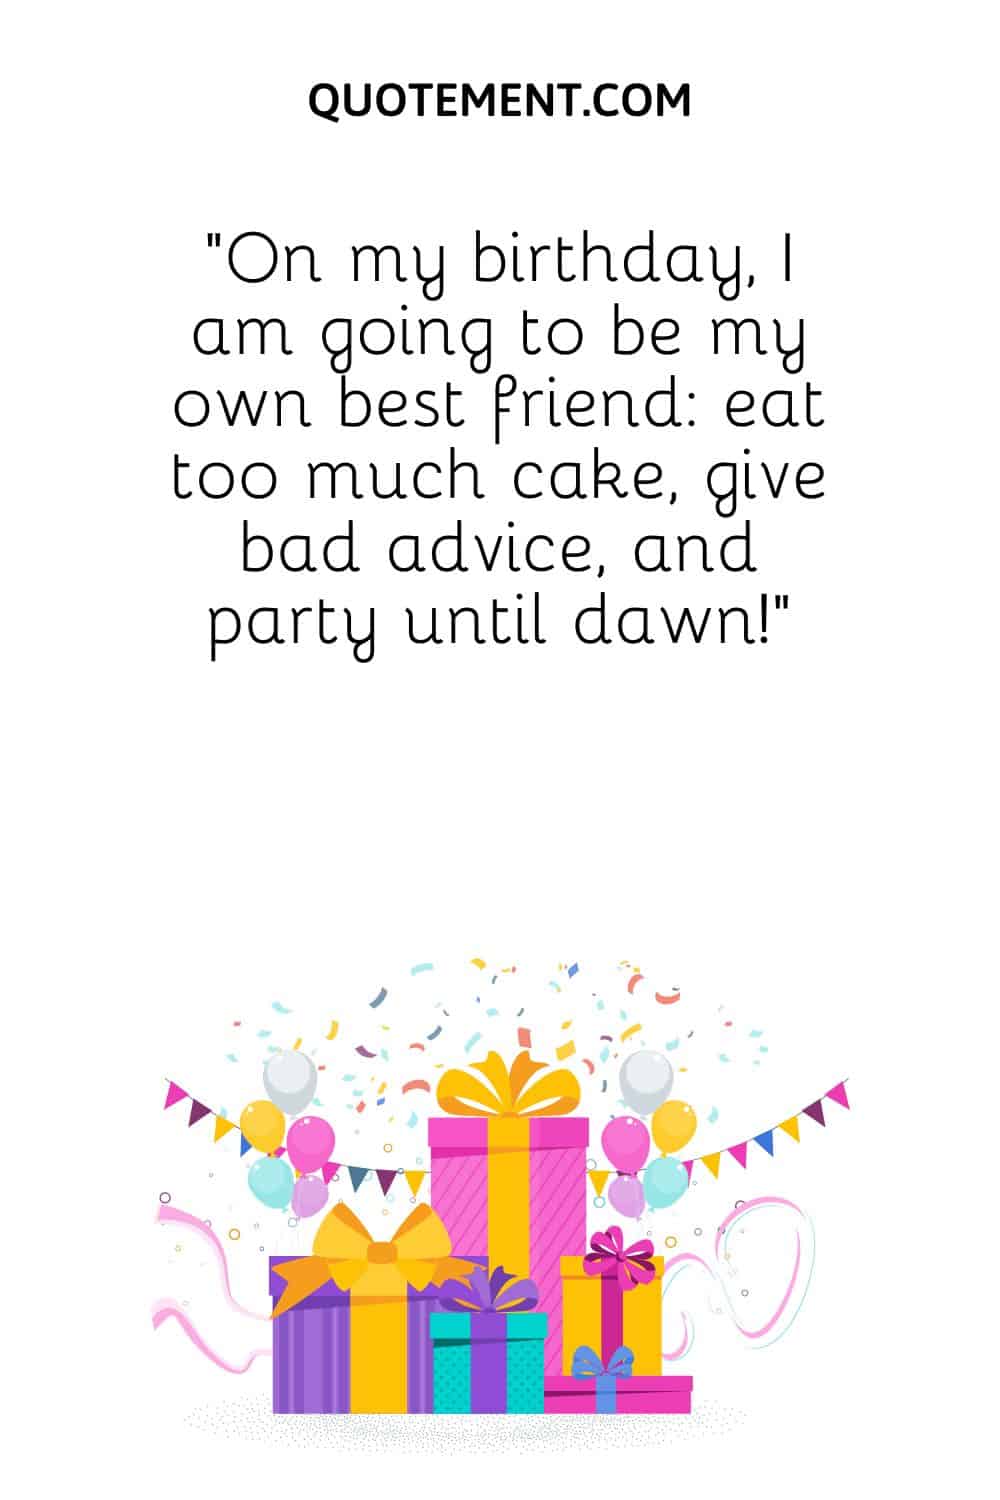 On my birthday, I am going to be my own best friend eat too much cake, give bad advice, and party until dawn